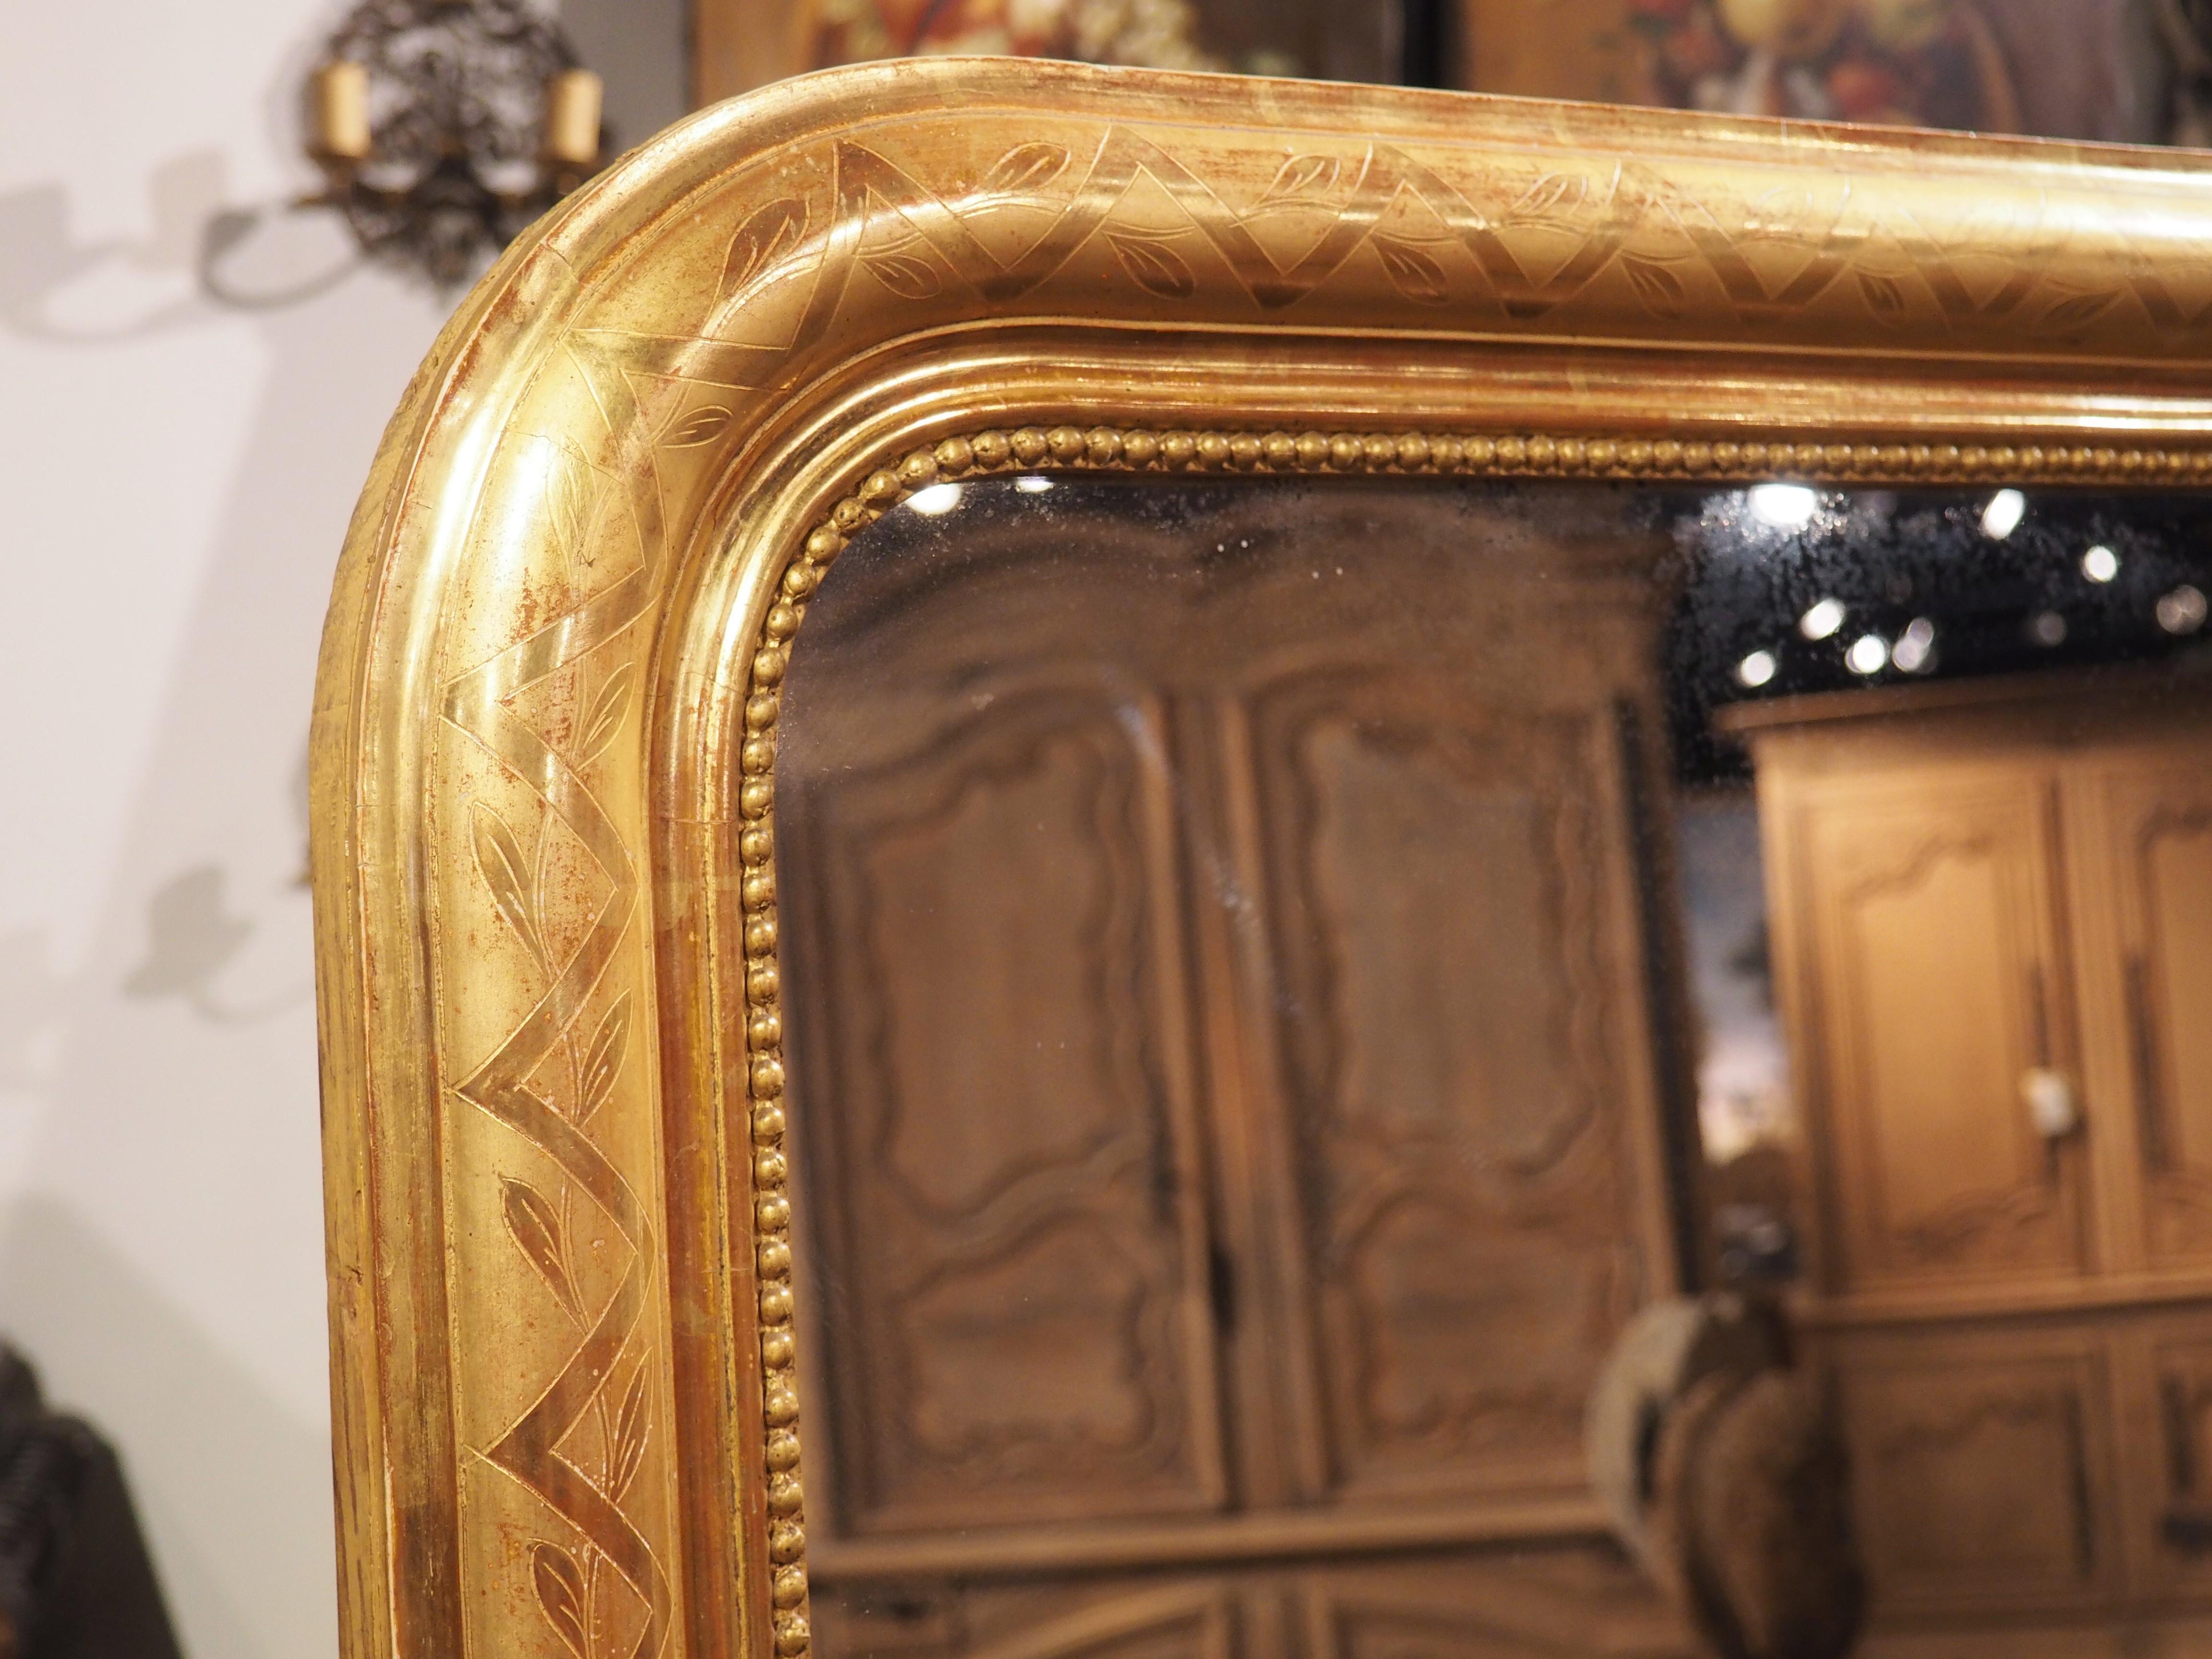 Known for understated elegance by means of subtle embellishments, Louis Philippe mirrors are always in high demand, as the clean lines mesh with almost any style of design. Our tall gold leaf mirror from France is no exception, despite a commanding